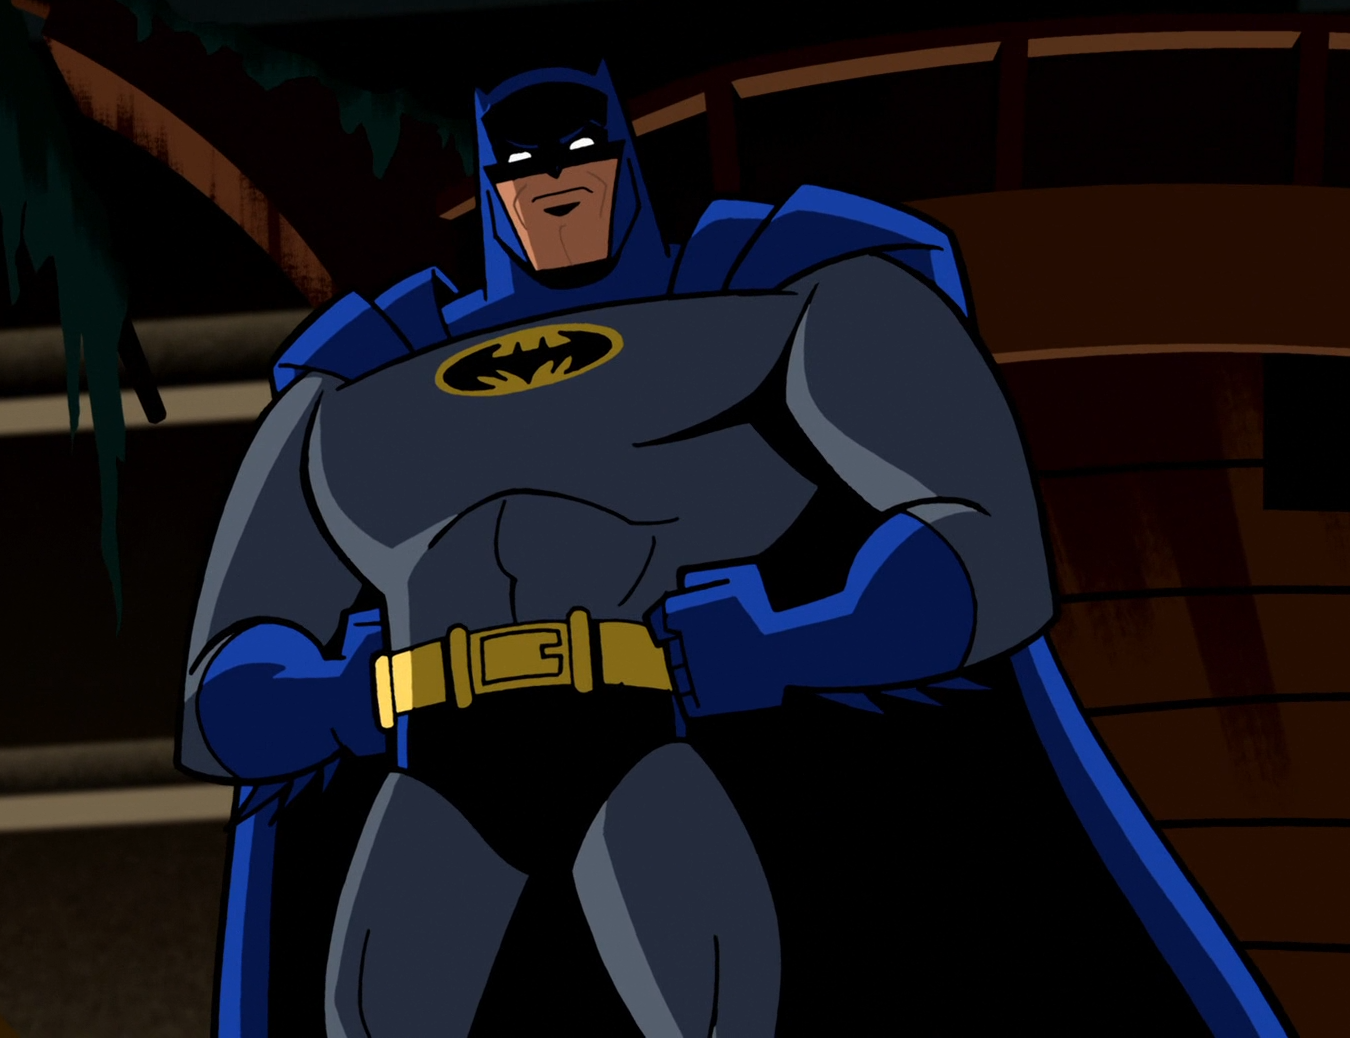 Justice Society of America in Batman : Brave & The Bold Cartoon  Justice  society of america, Brave and the bold, Dc comics heroes